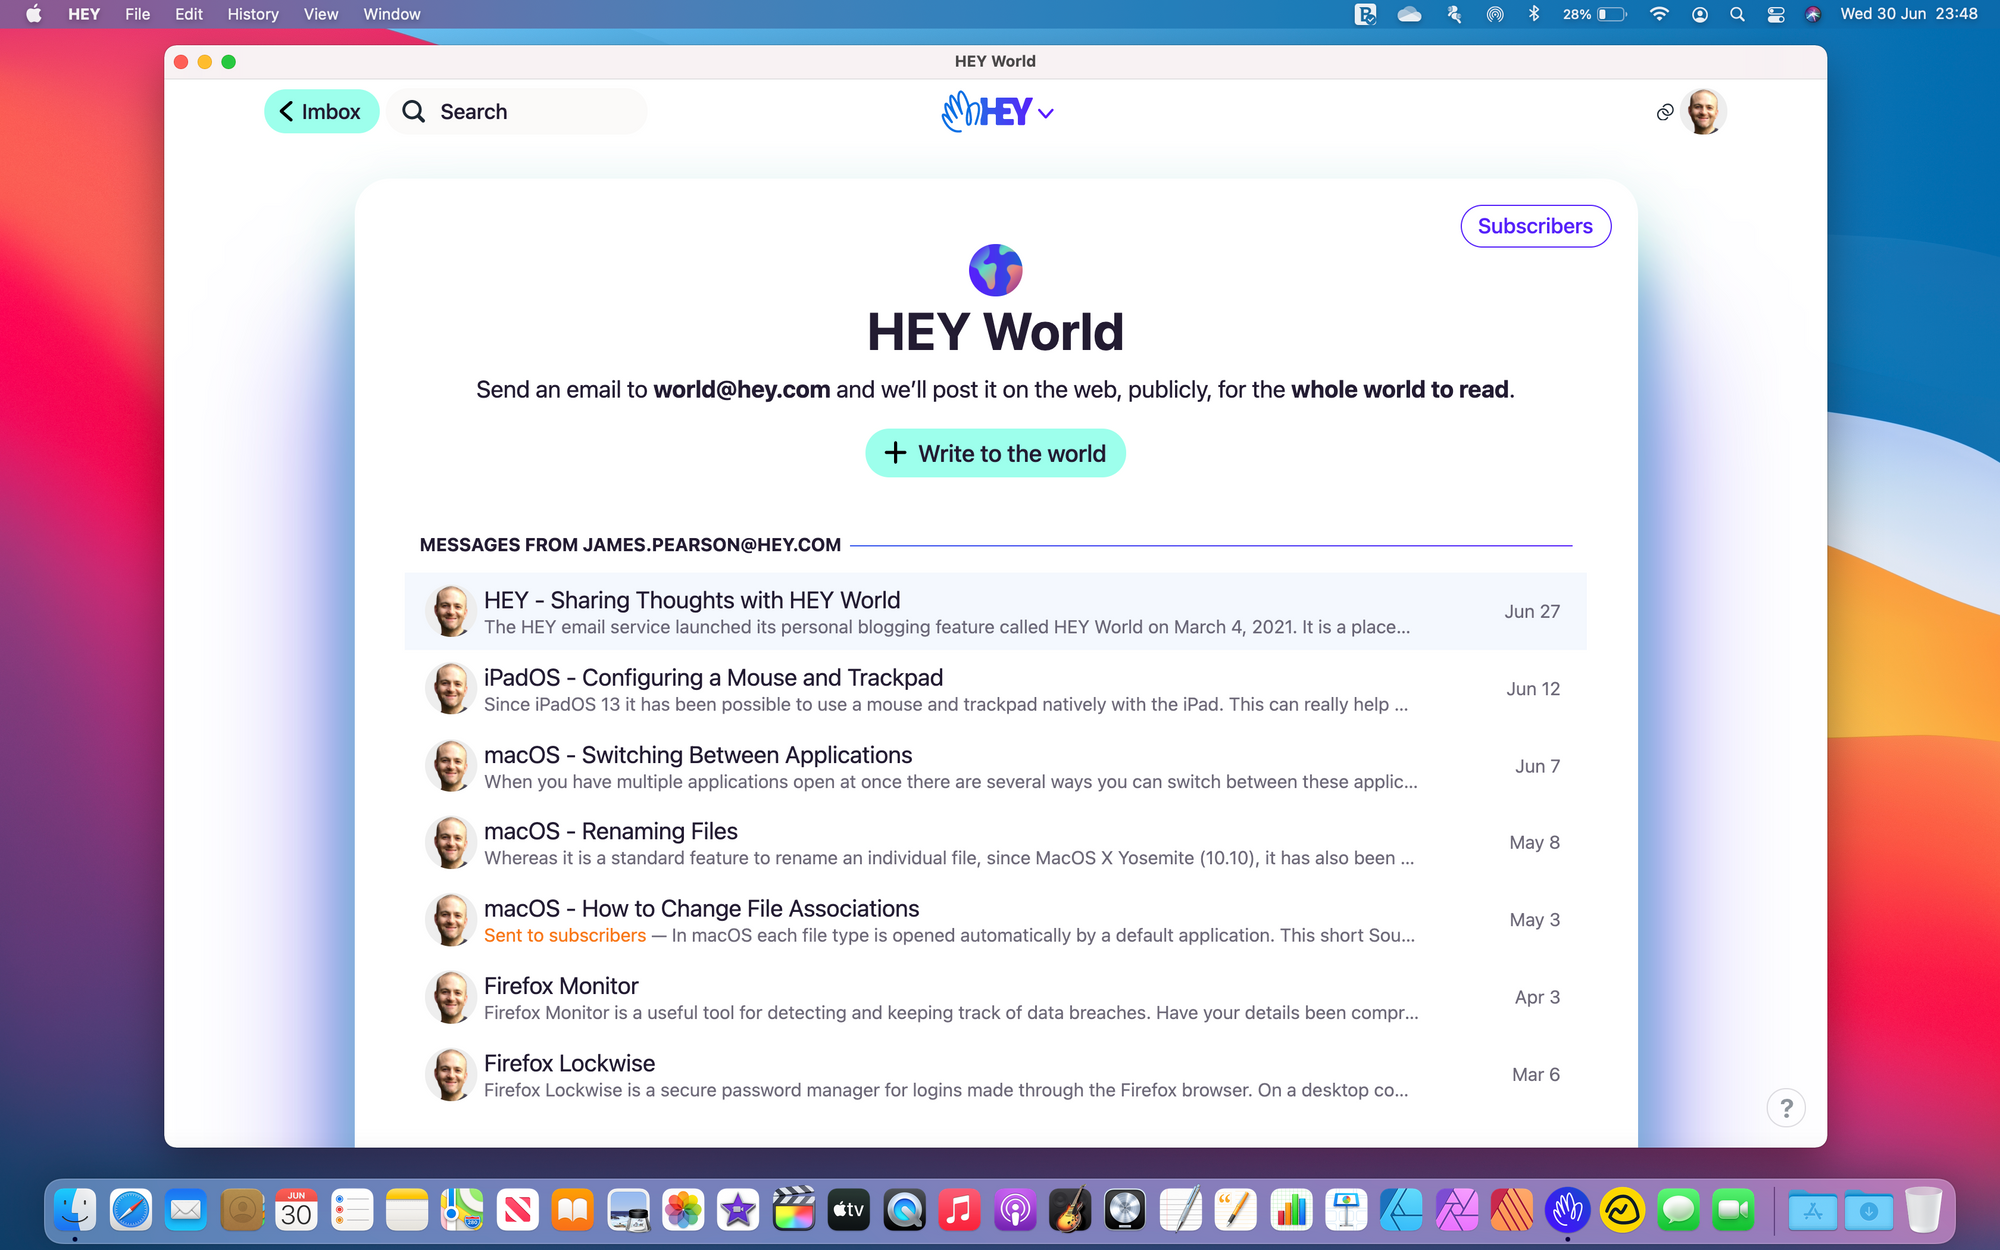 The HEY World page showing all your published posts.